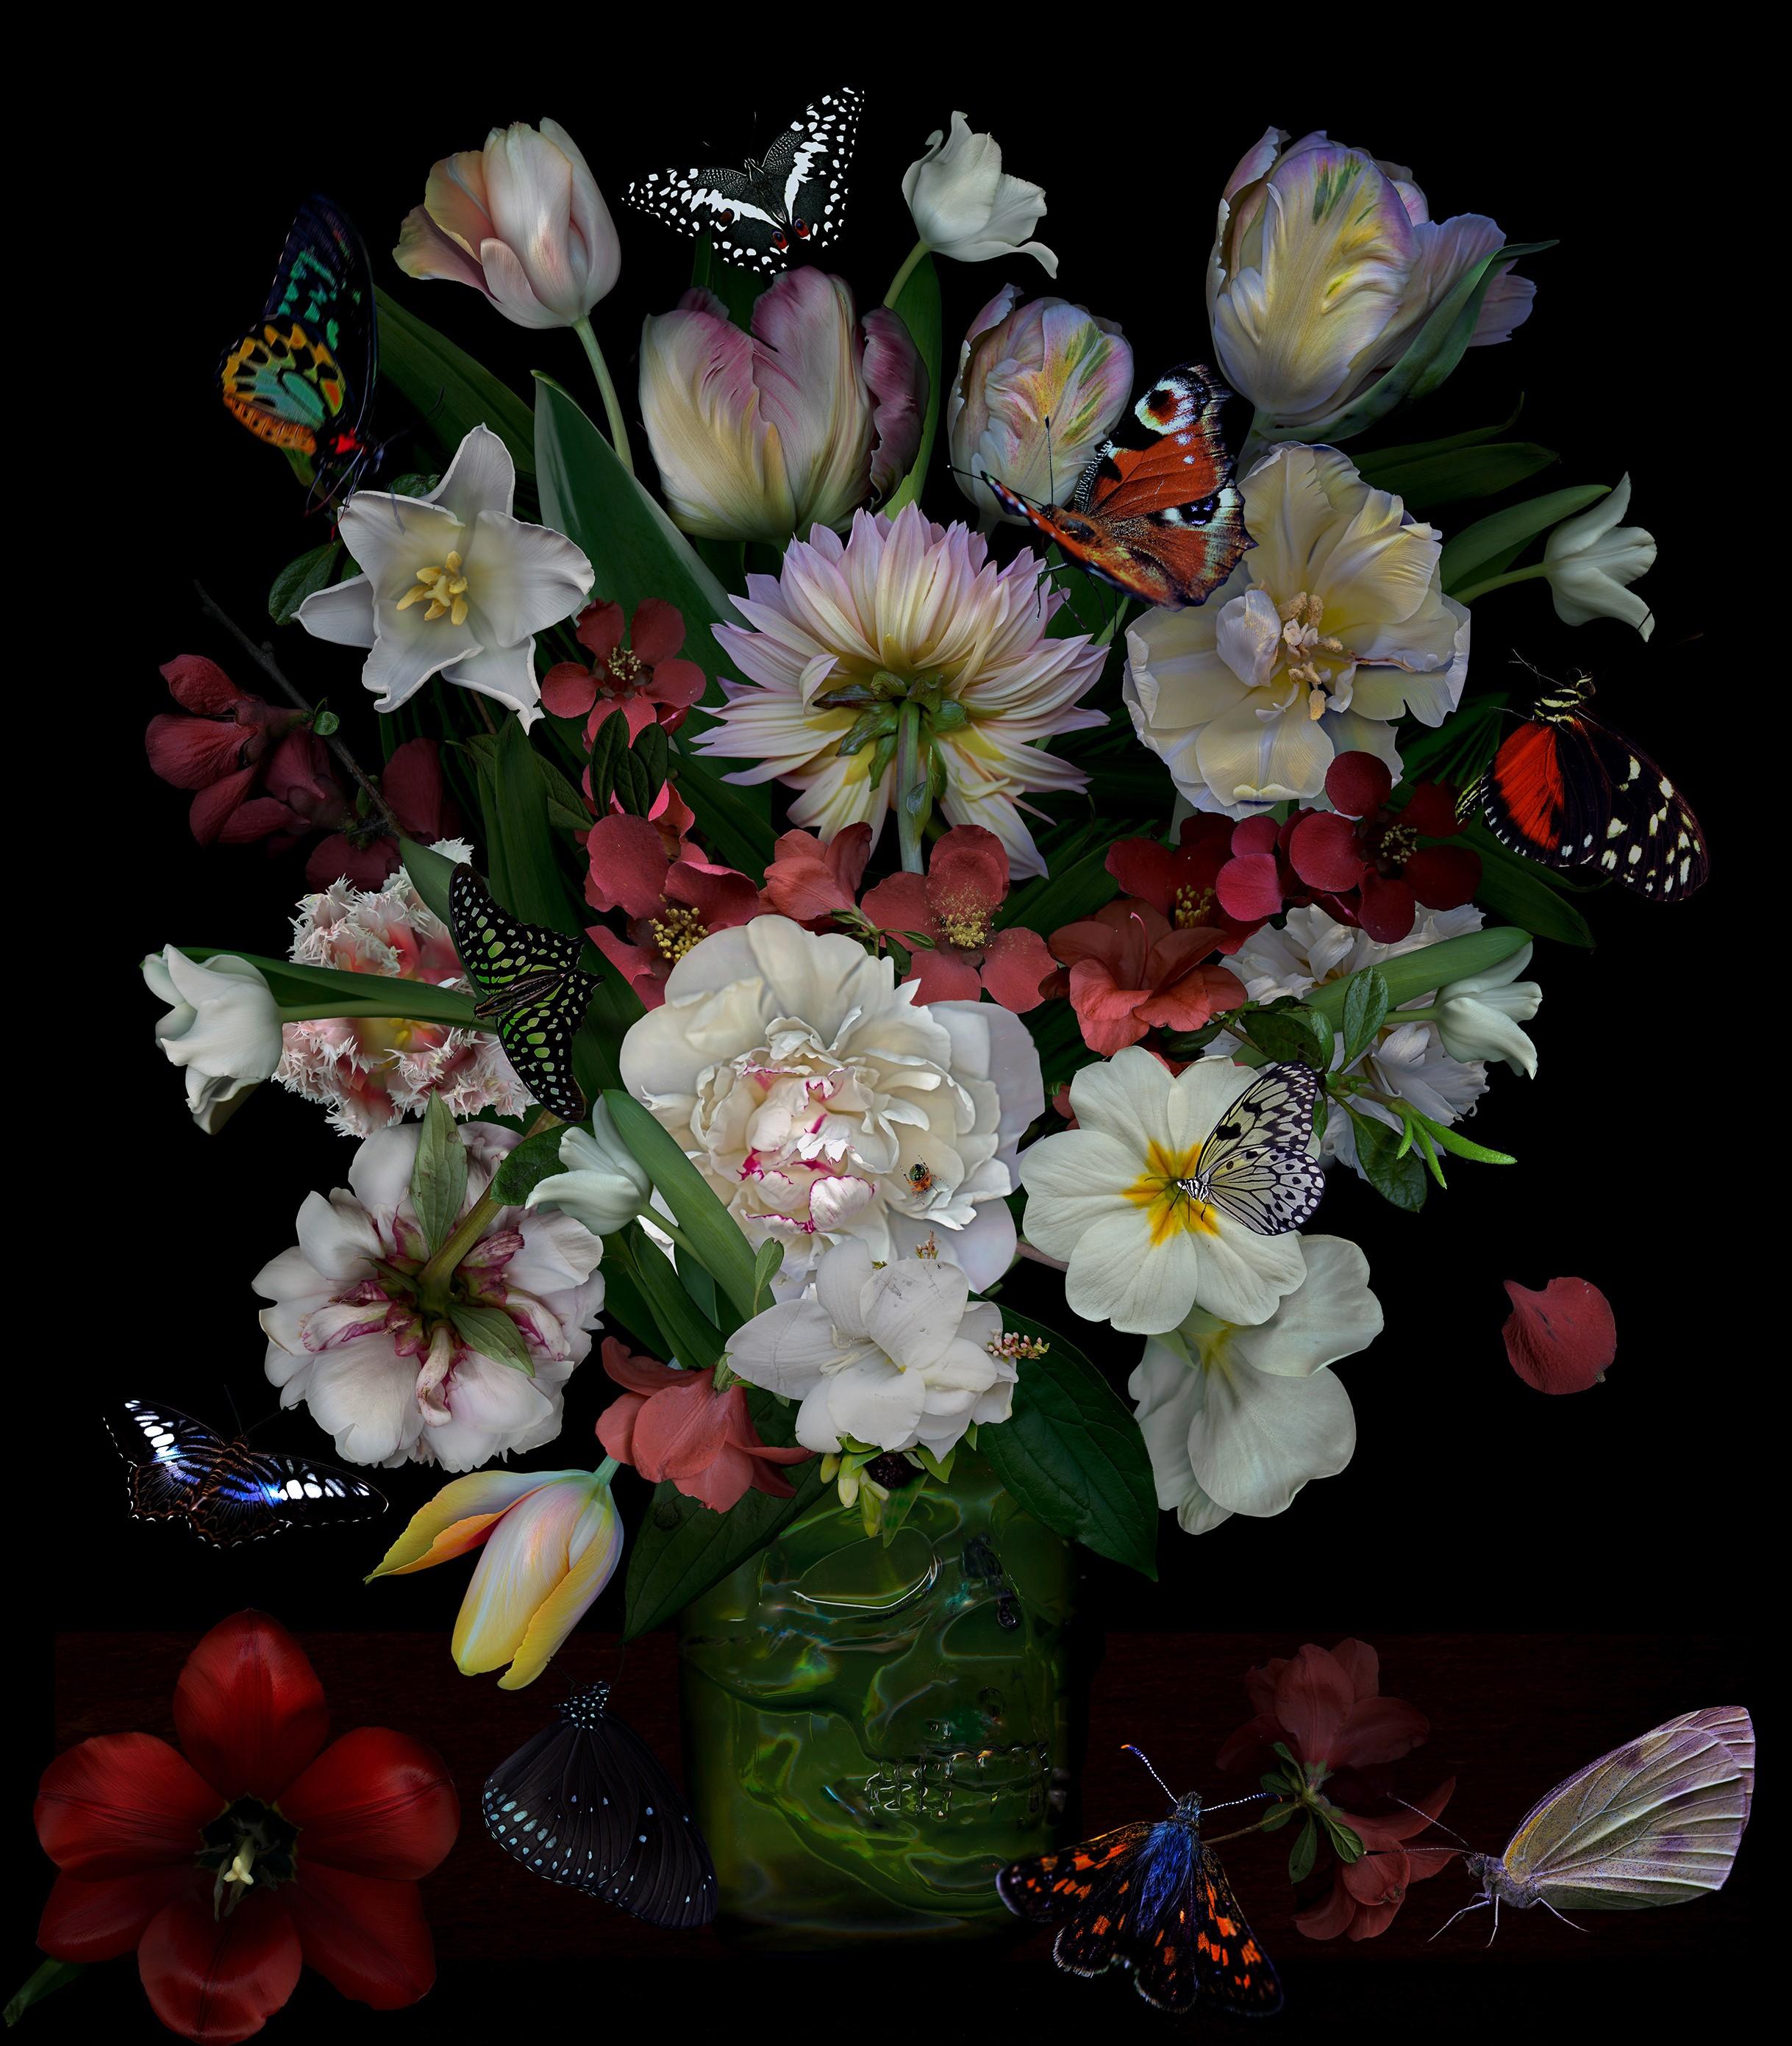 Still Life with a Green Skull. Flowers. Digital Collage Color Photograph